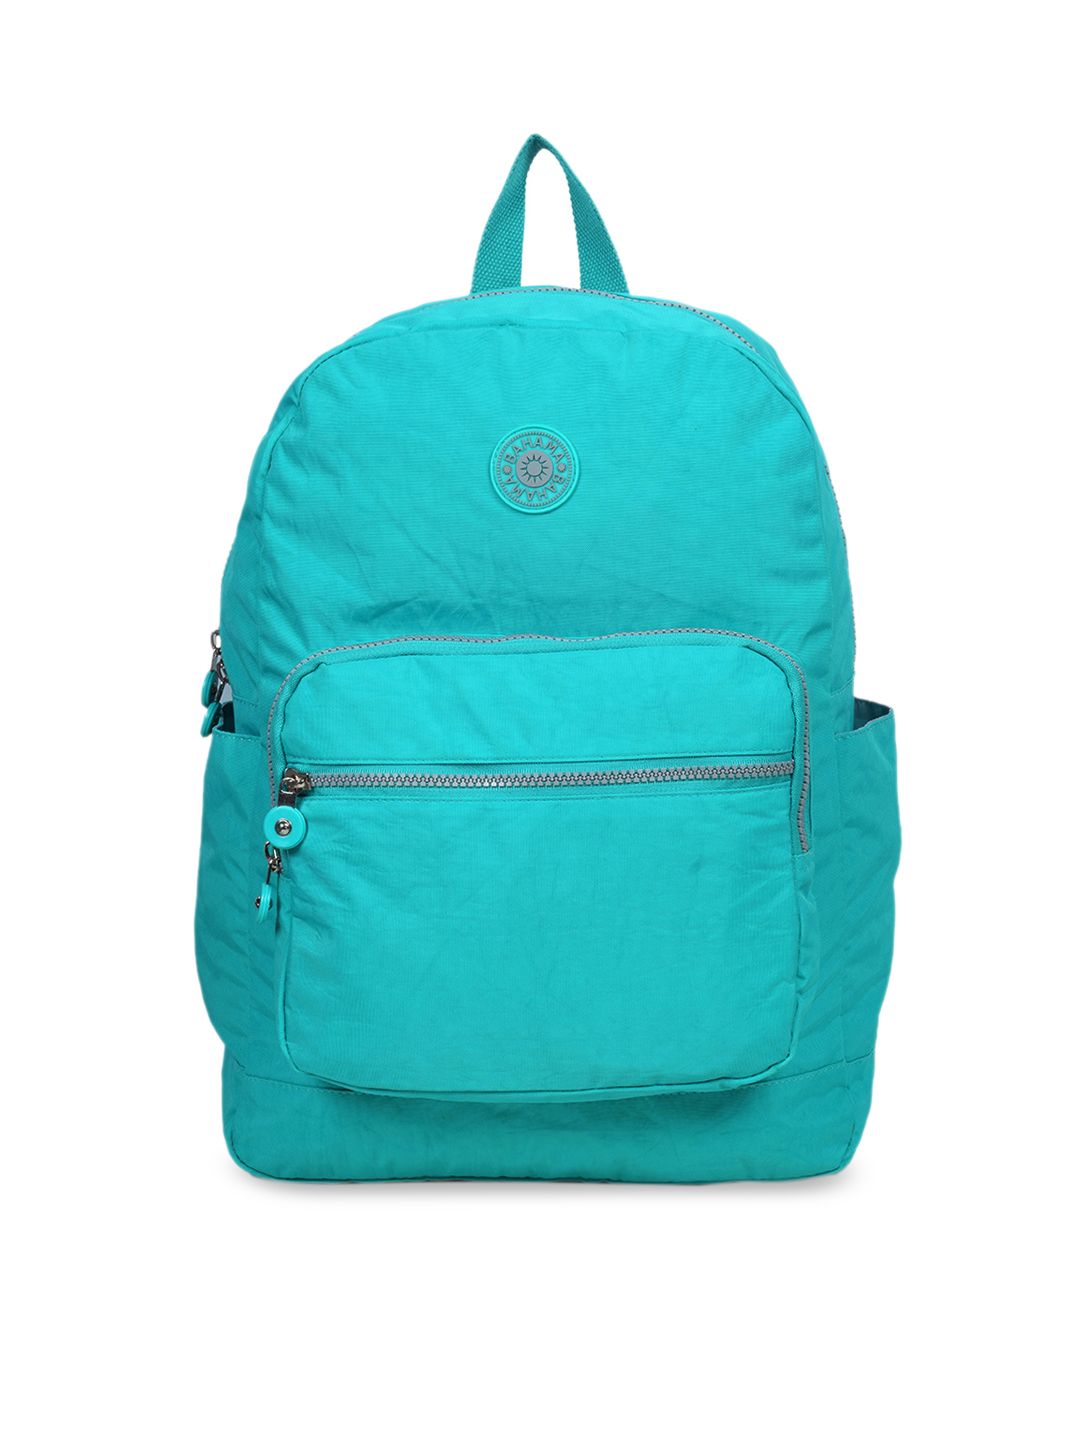 BAHAMA Unisex Blue Solid Backpack Price in India